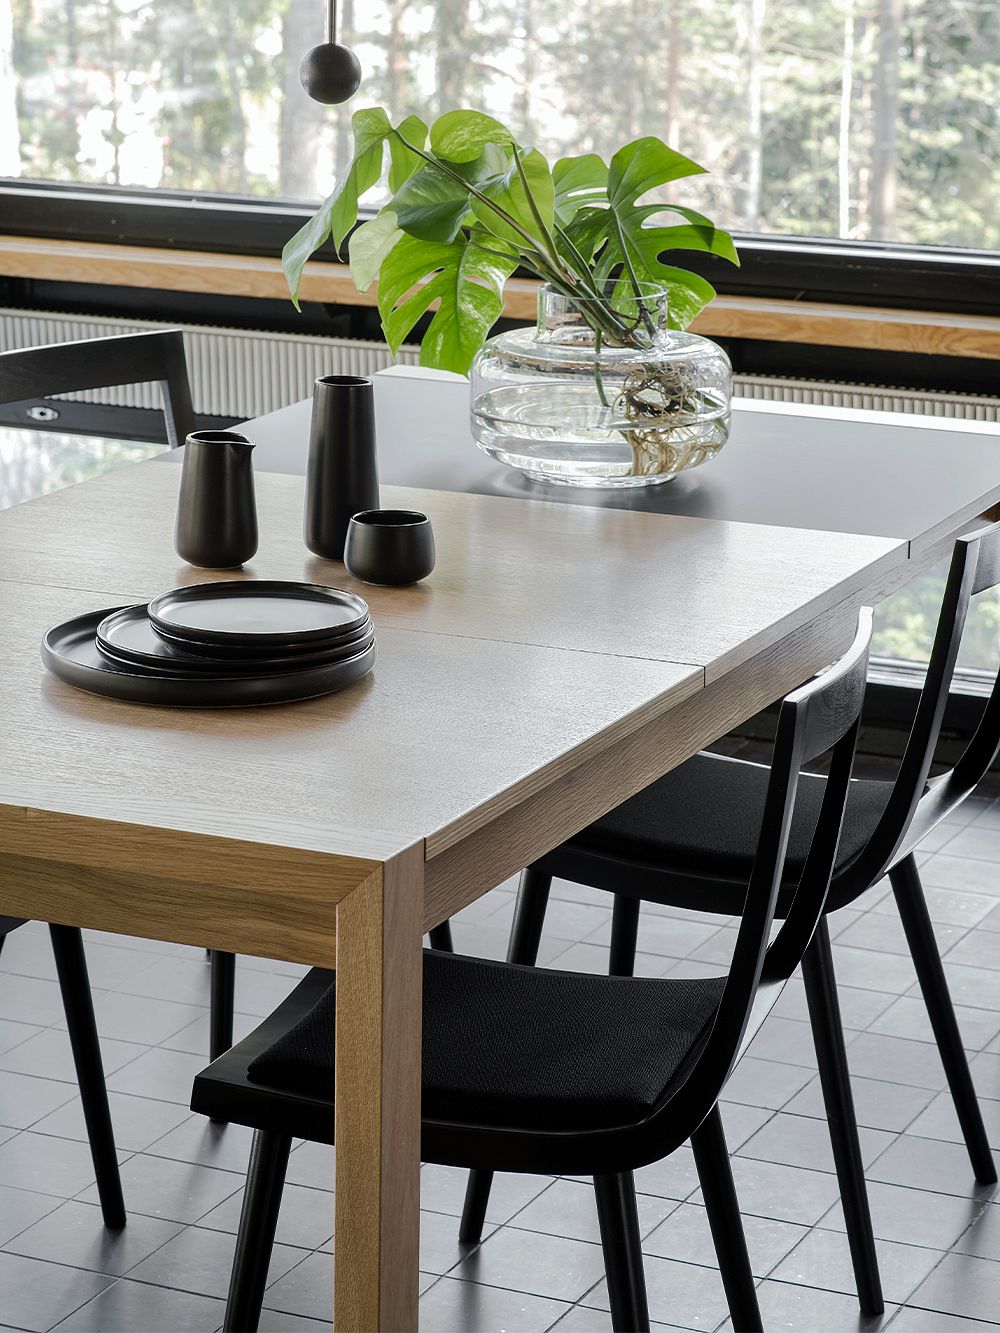 A dining space with Tapio Anttila's Jat-ko table and Viiva chairs. In the background, a window with a forest view anf on the table, a Marimekko glass vase with Monstera branches.